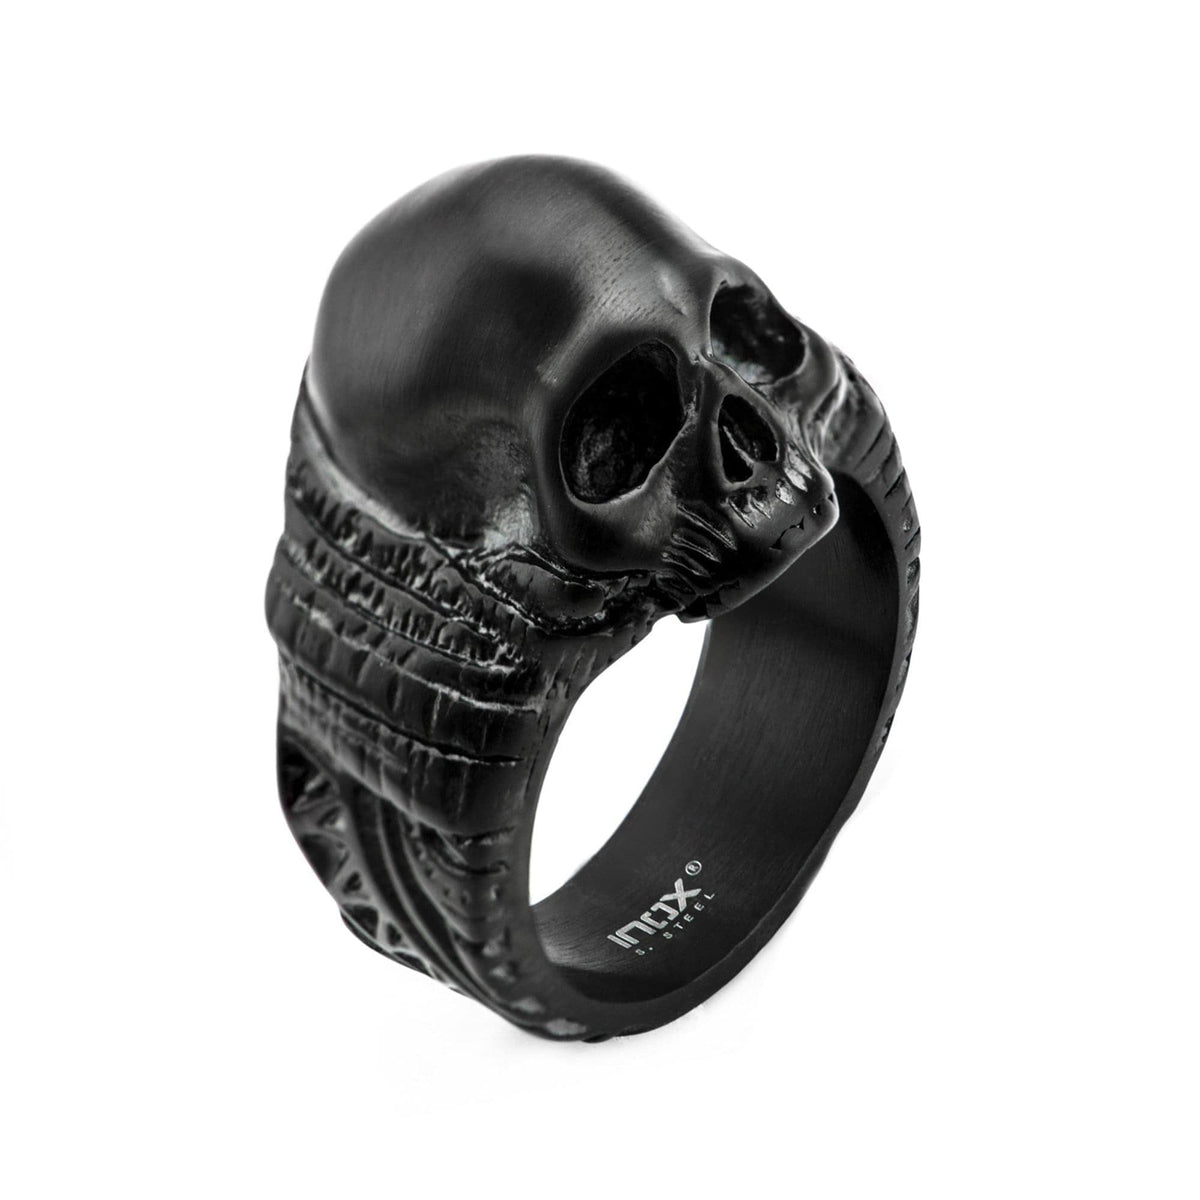 INOX JEWELRY Rings Black Stainless Steel Matte Finish Skull with Ancient Markings Ring